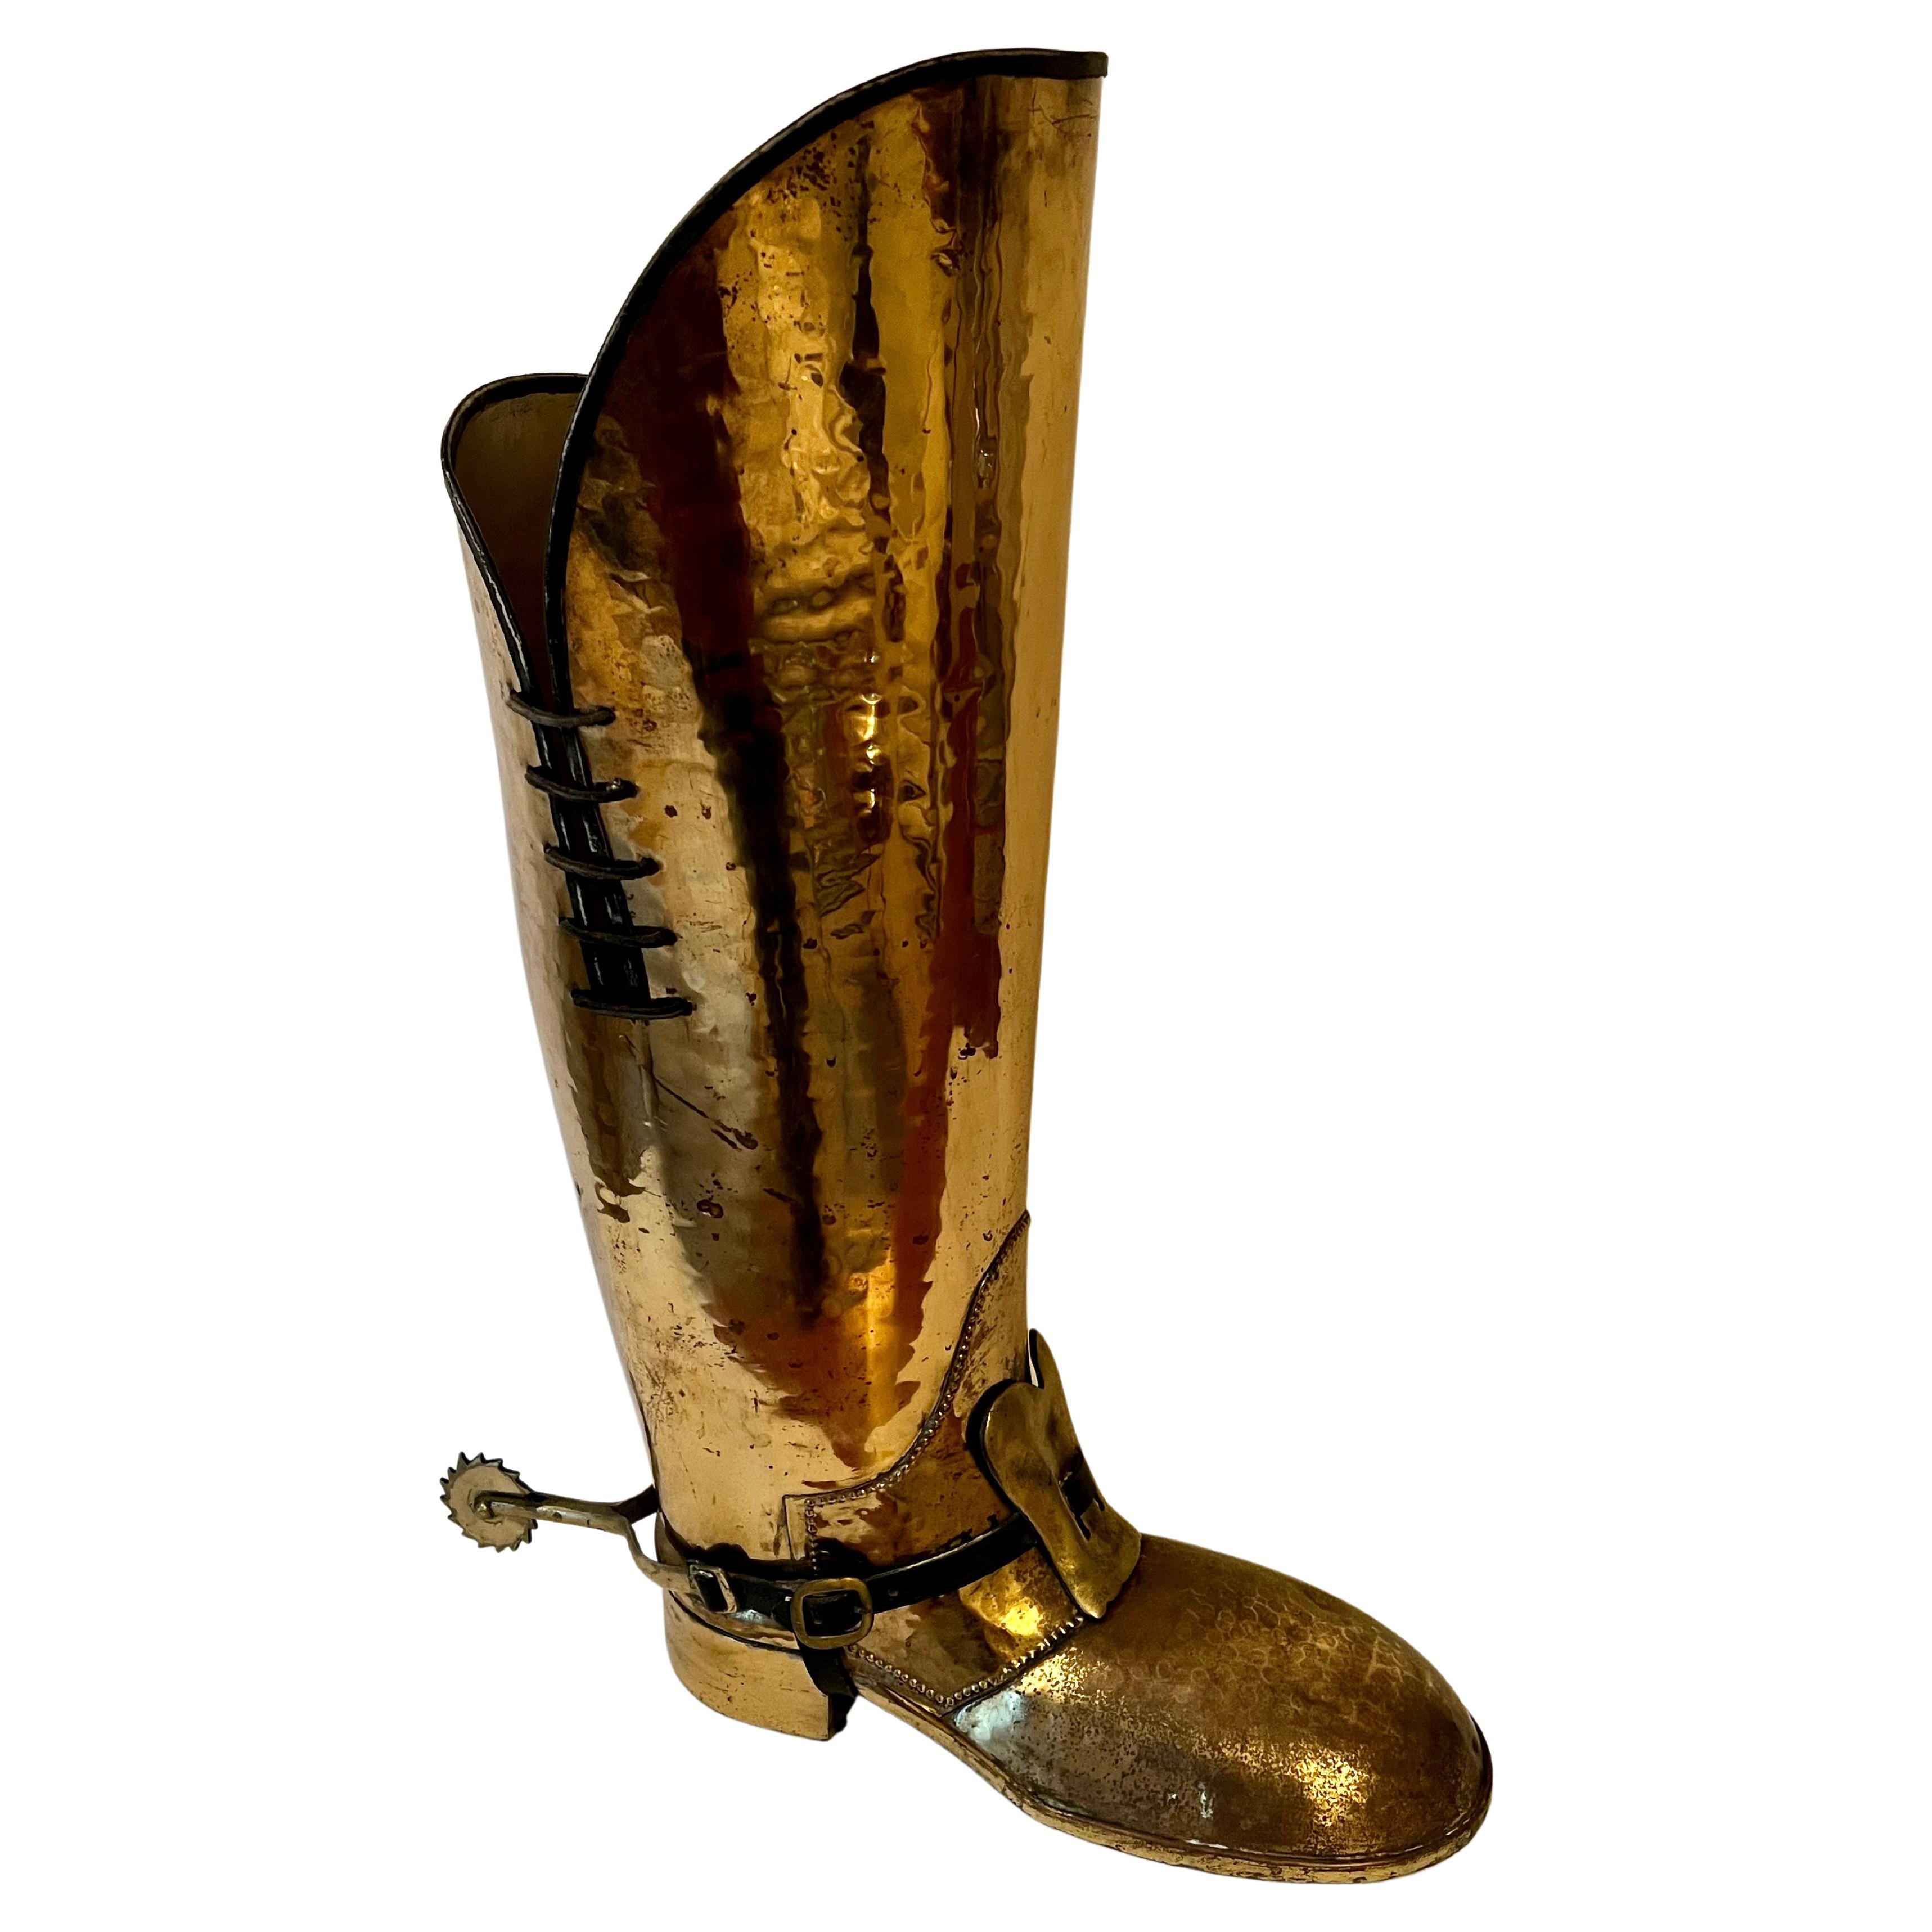 Brass Coachmans Boot Umbrella Stand with Leather Lashings and Straps